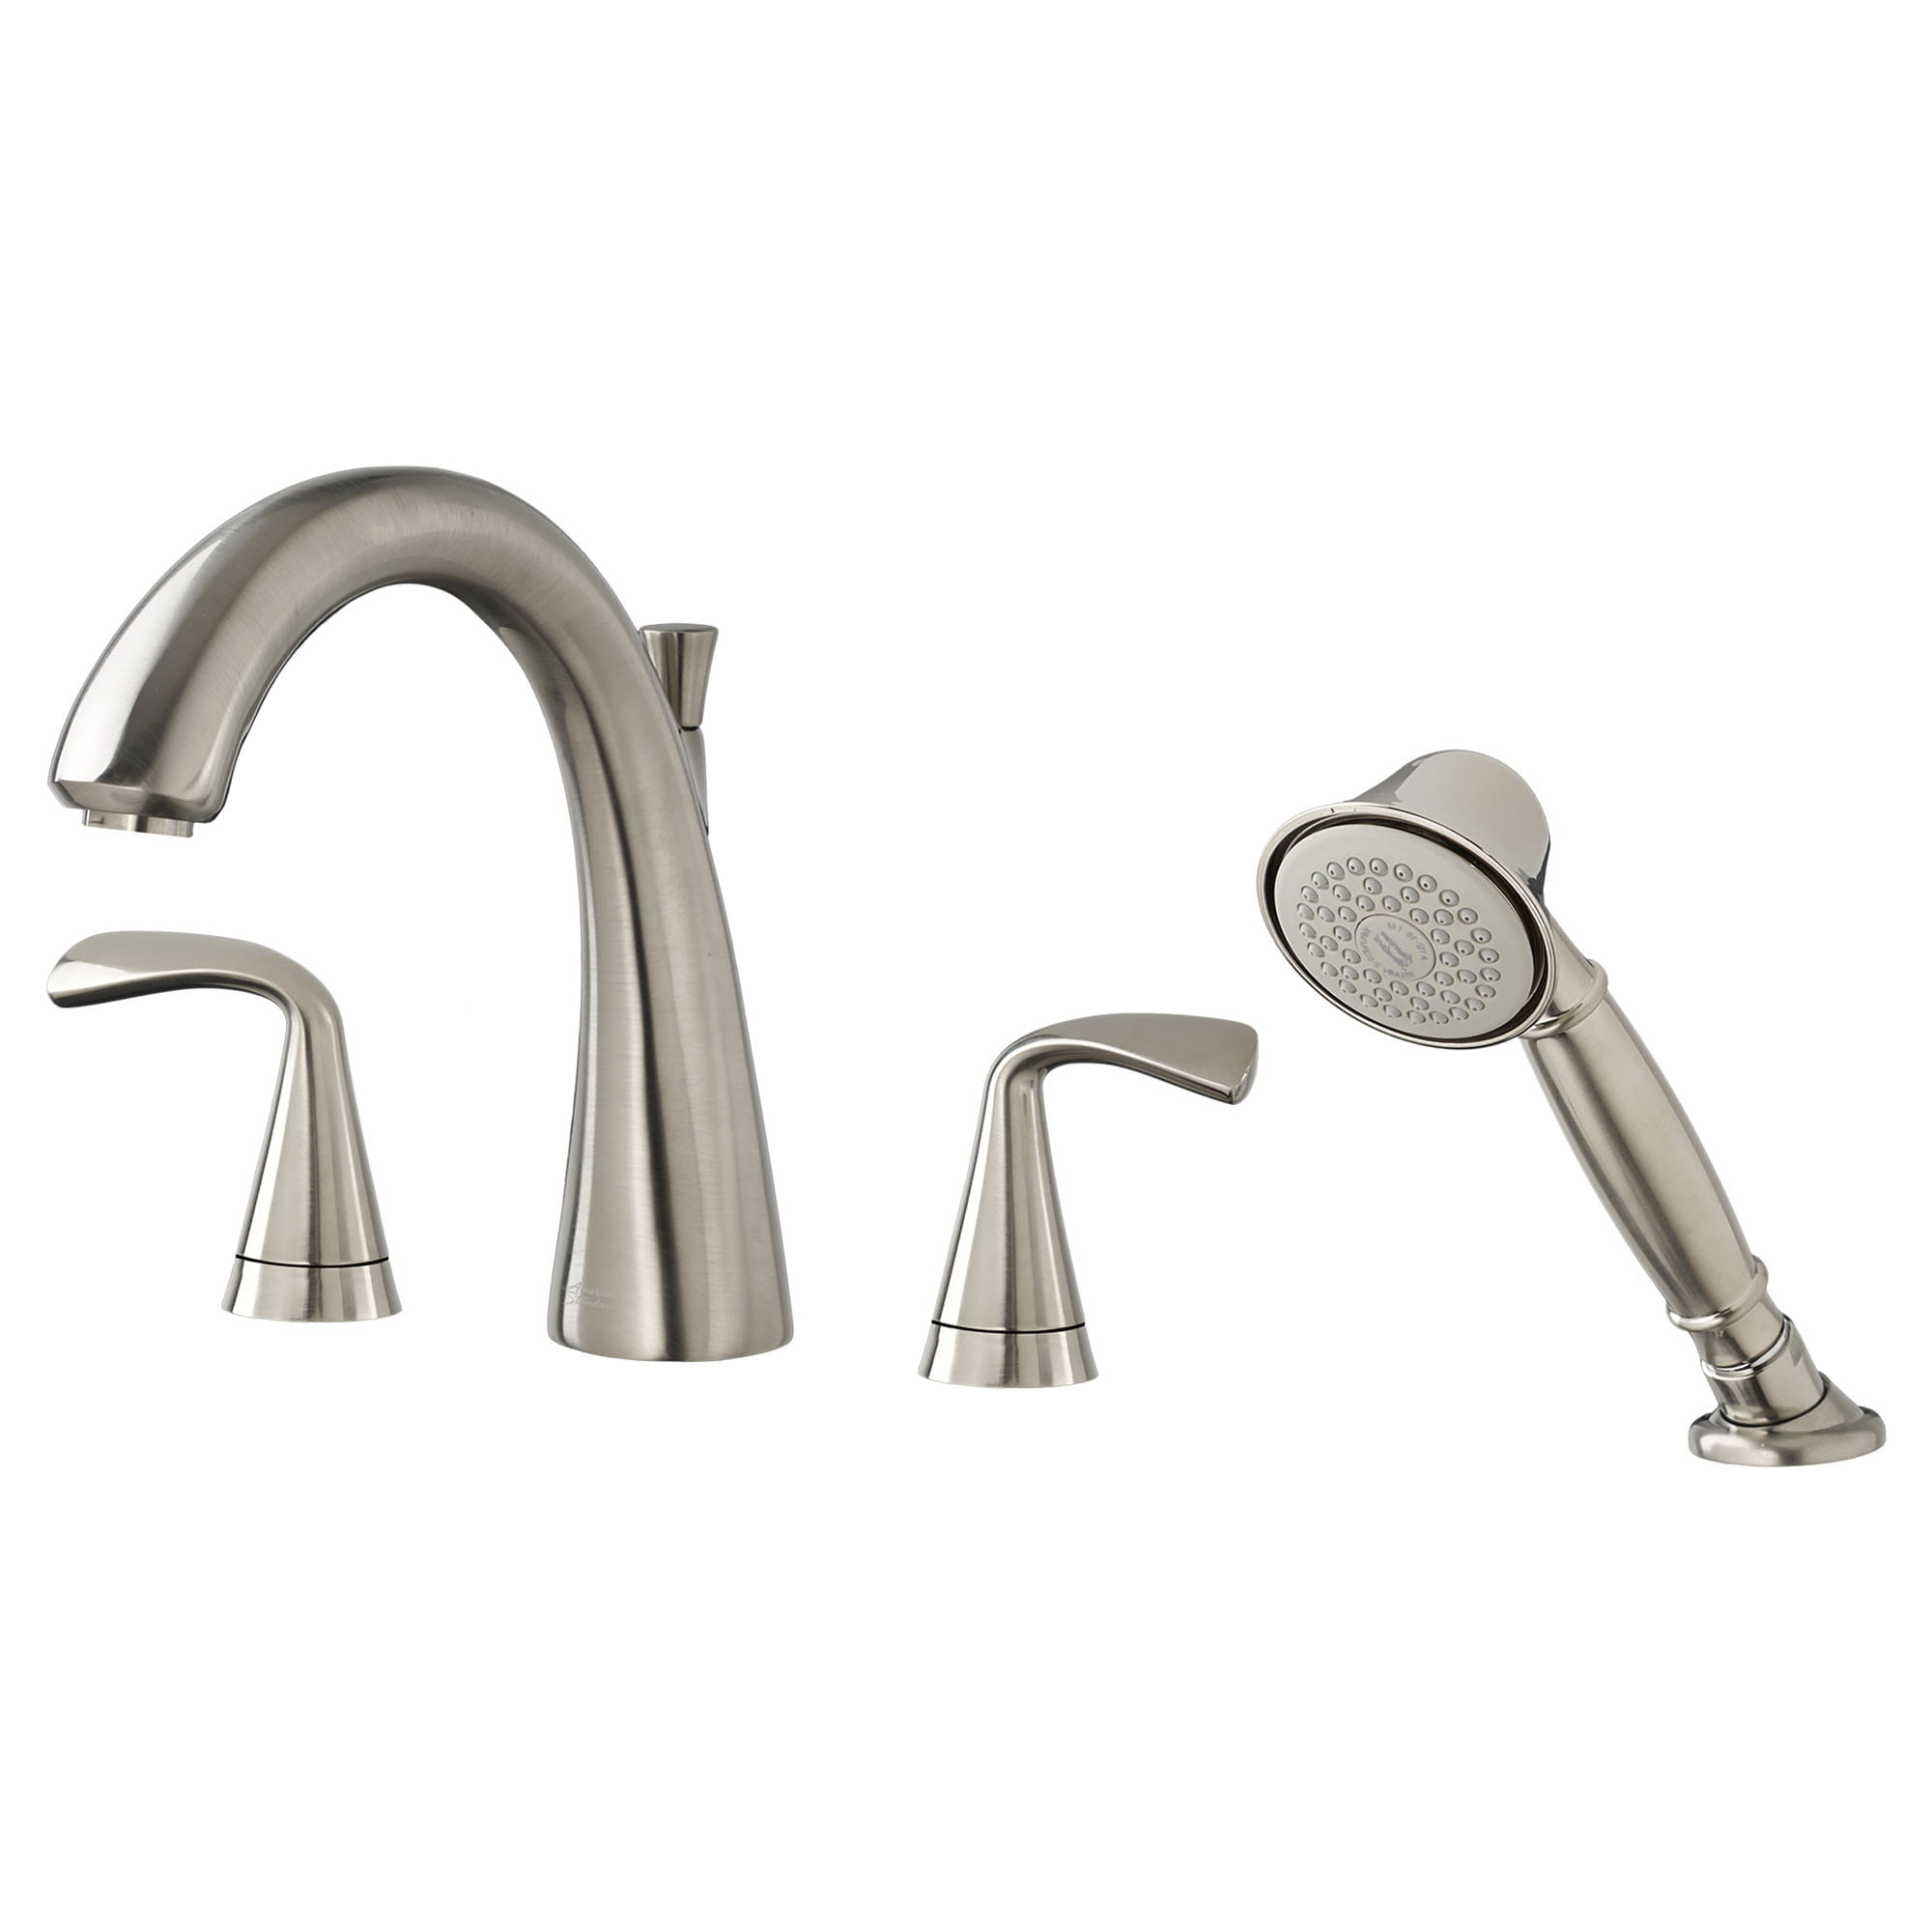 Fluent Bathtub Faucet With  Lever Handles and Personal Shower for Flash Rough In Valve   BRUSHED NICKEL